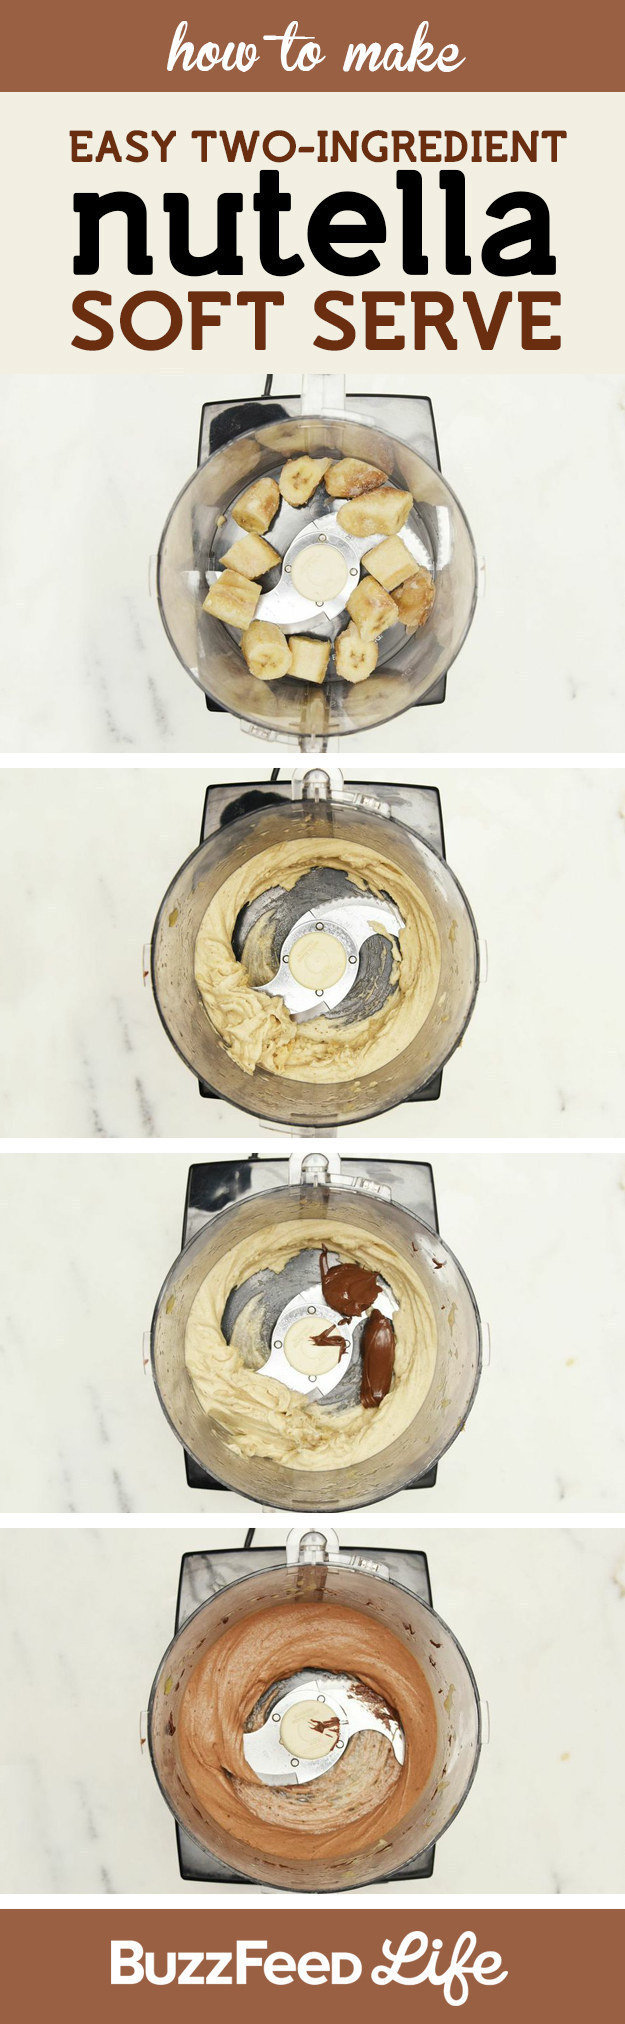 17 Truly Magical Things You Can Do With A Food Processor